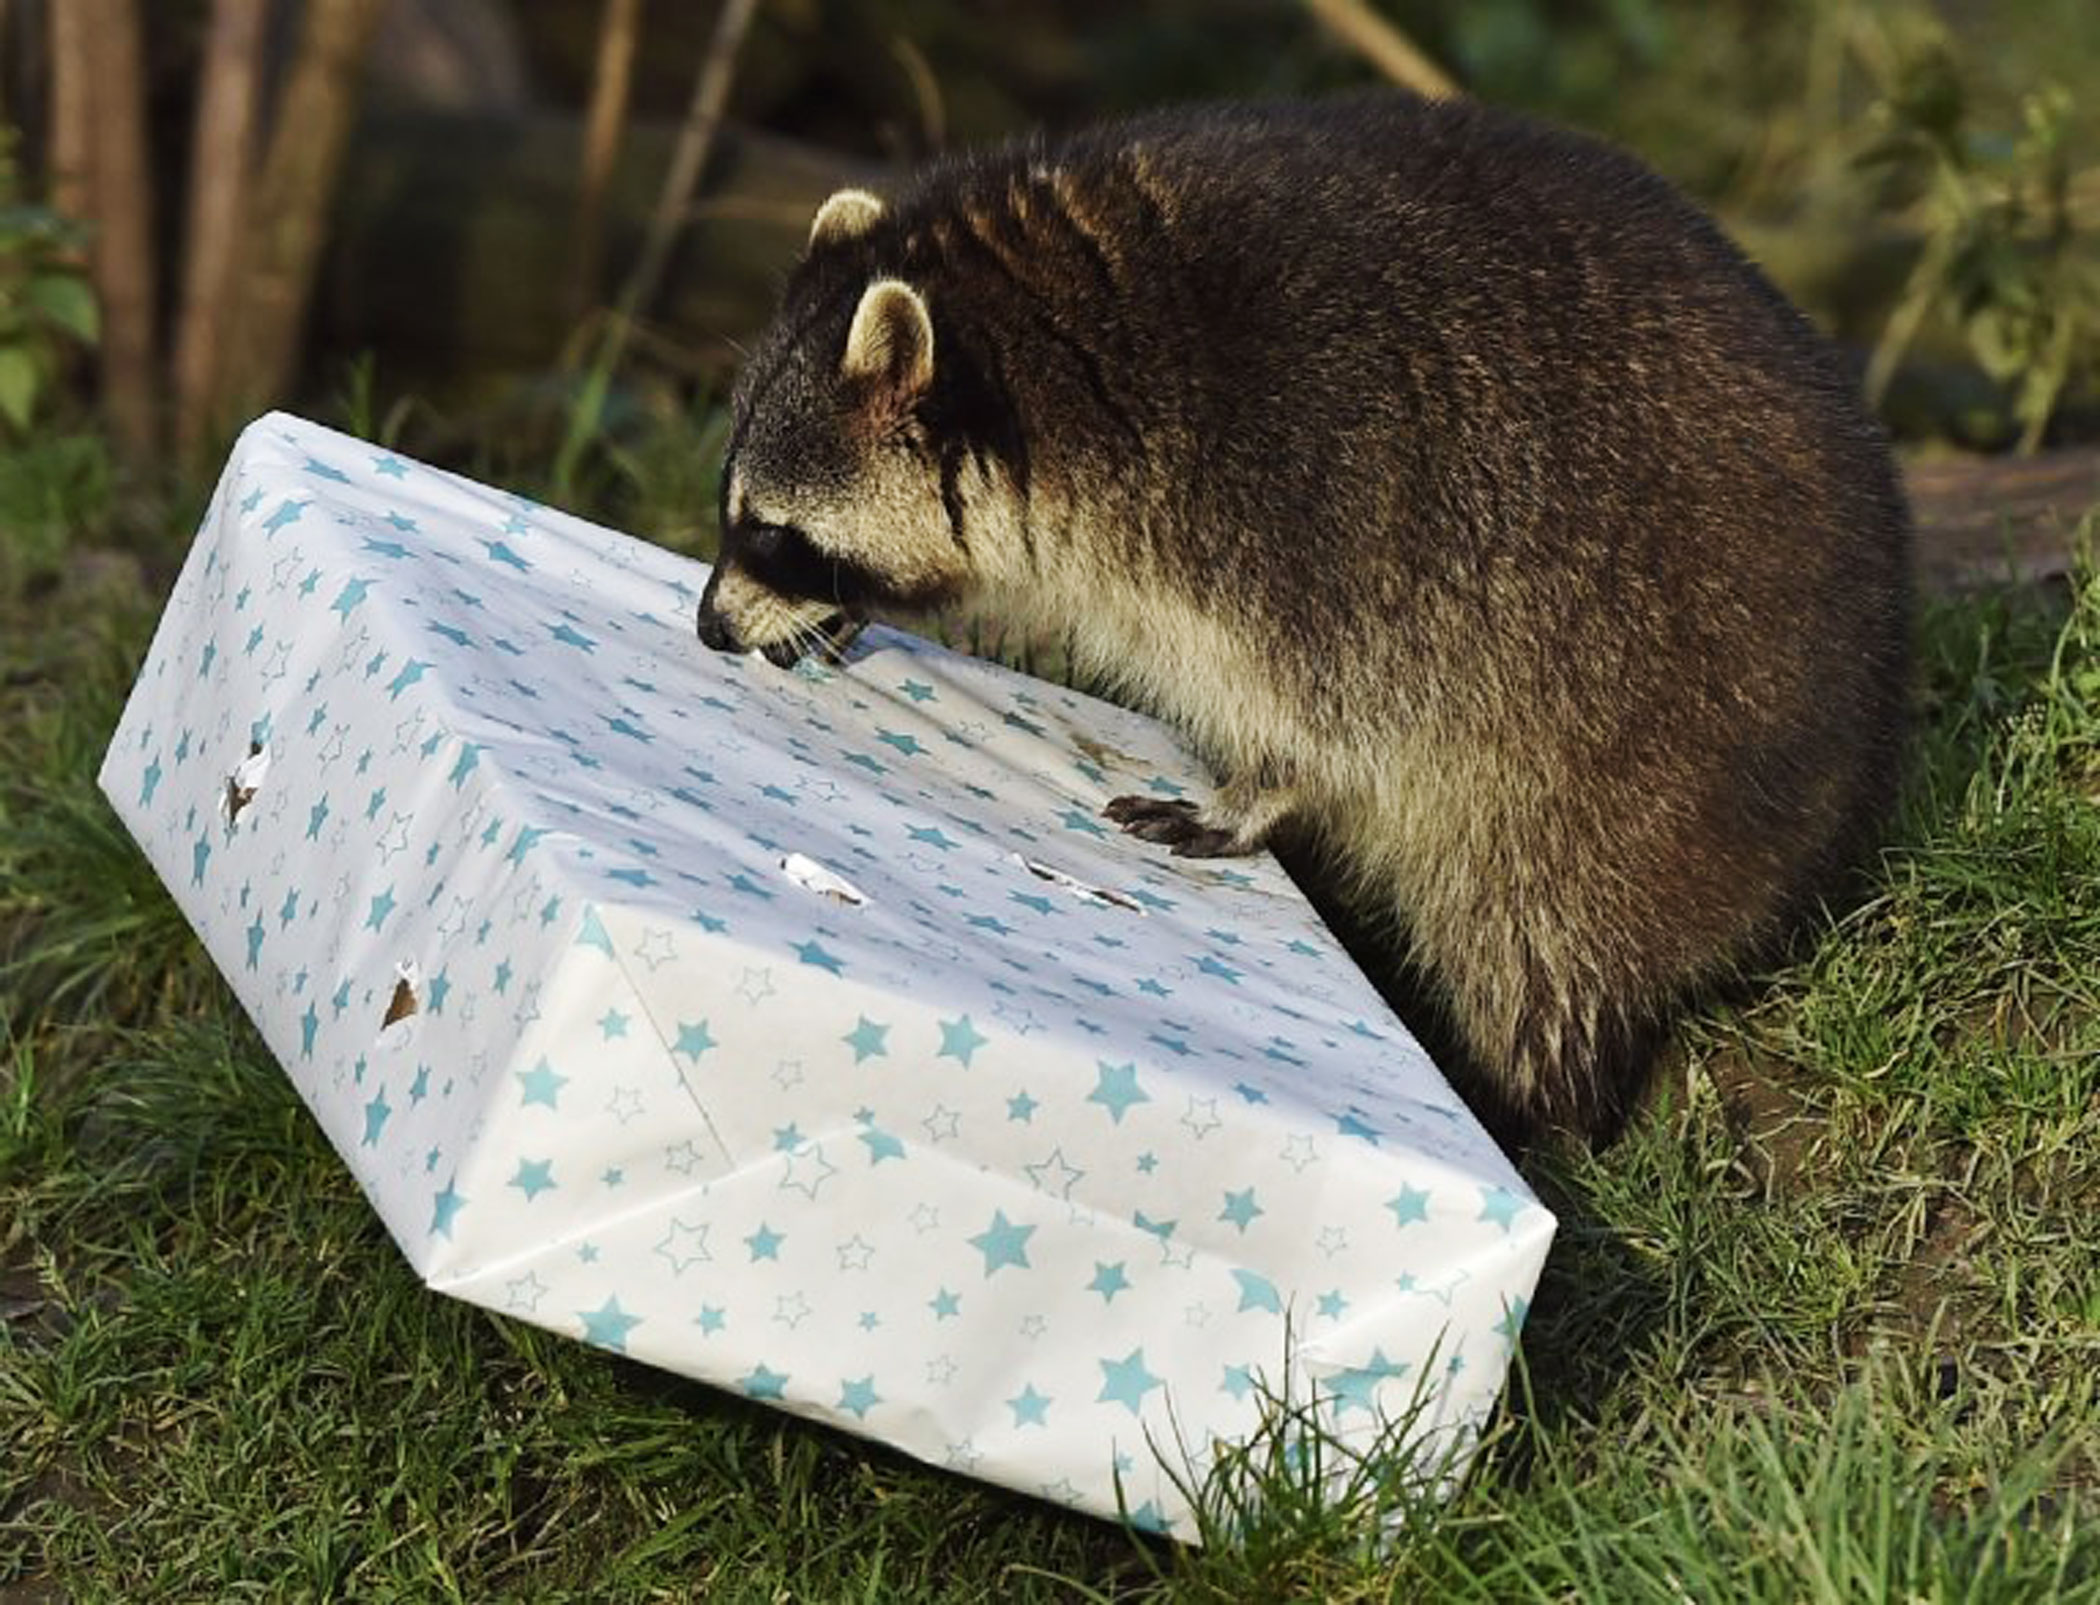 A raccoon tries to unwrap a Christmas gift containing food at the zoo in Gelsenkirchen, Germany, on Dec. 23, 2015.